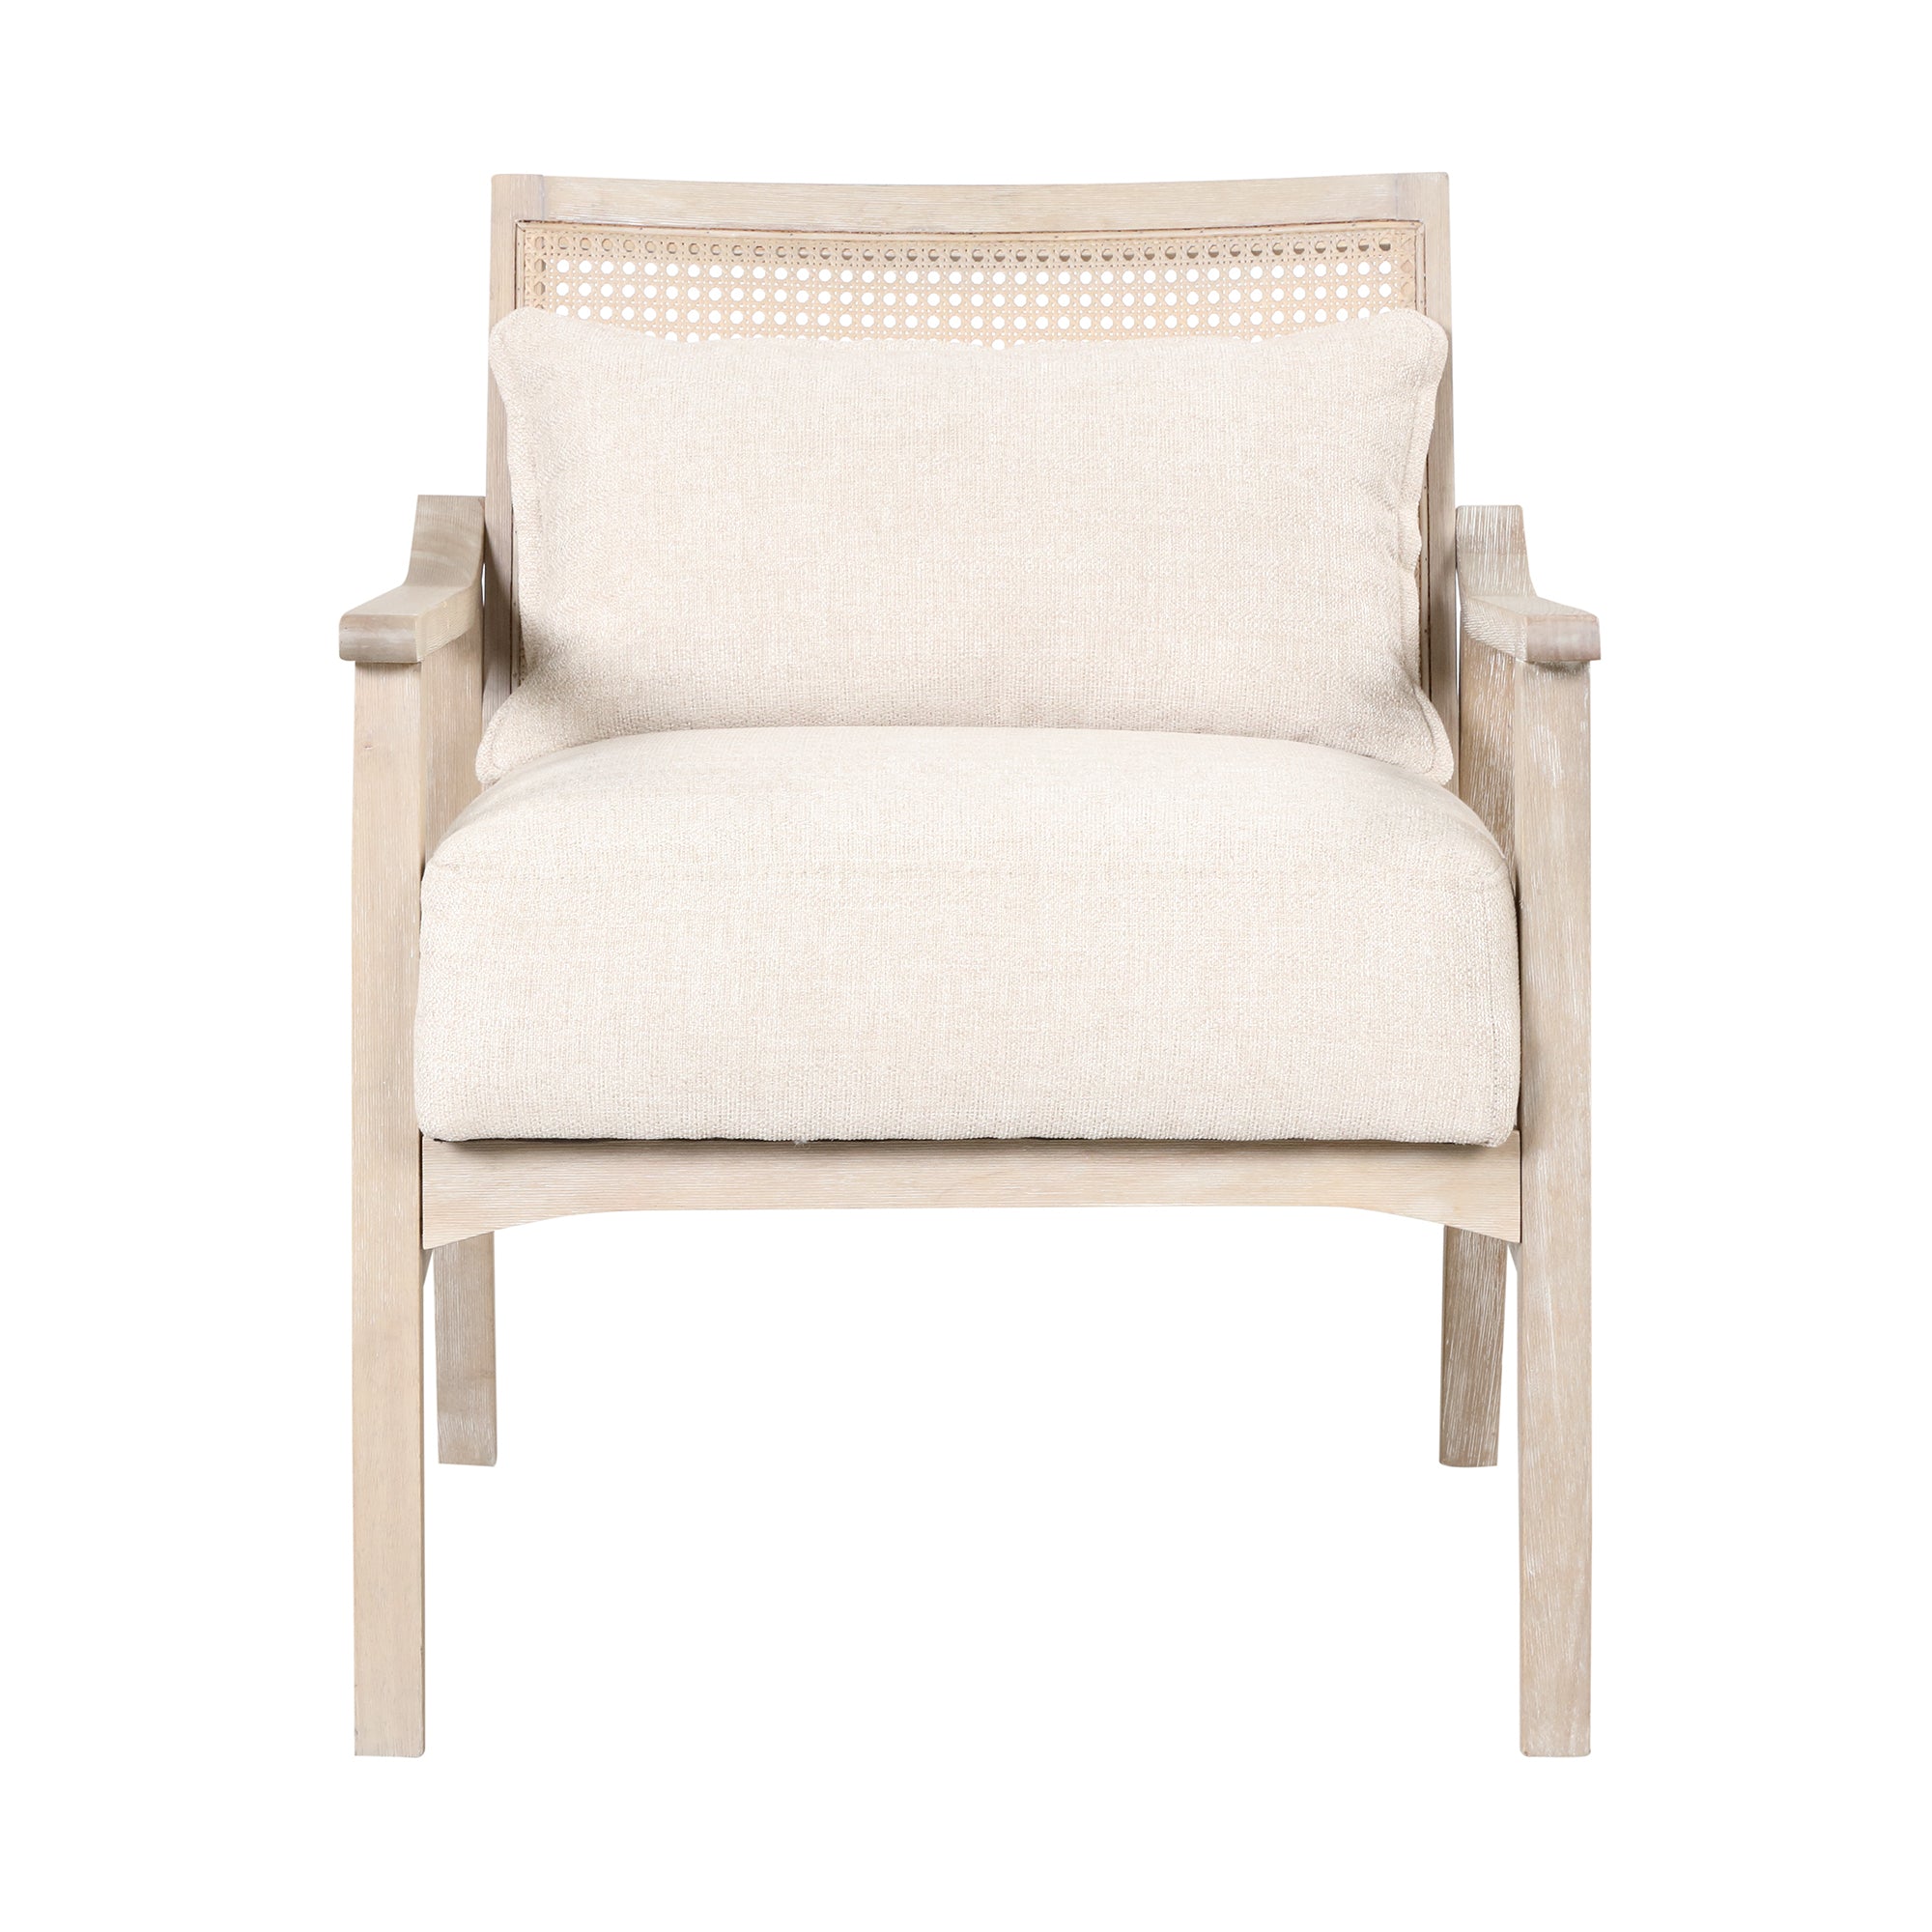 Farmhouse Style Accent Chair with Lumbar Pillow - Natural